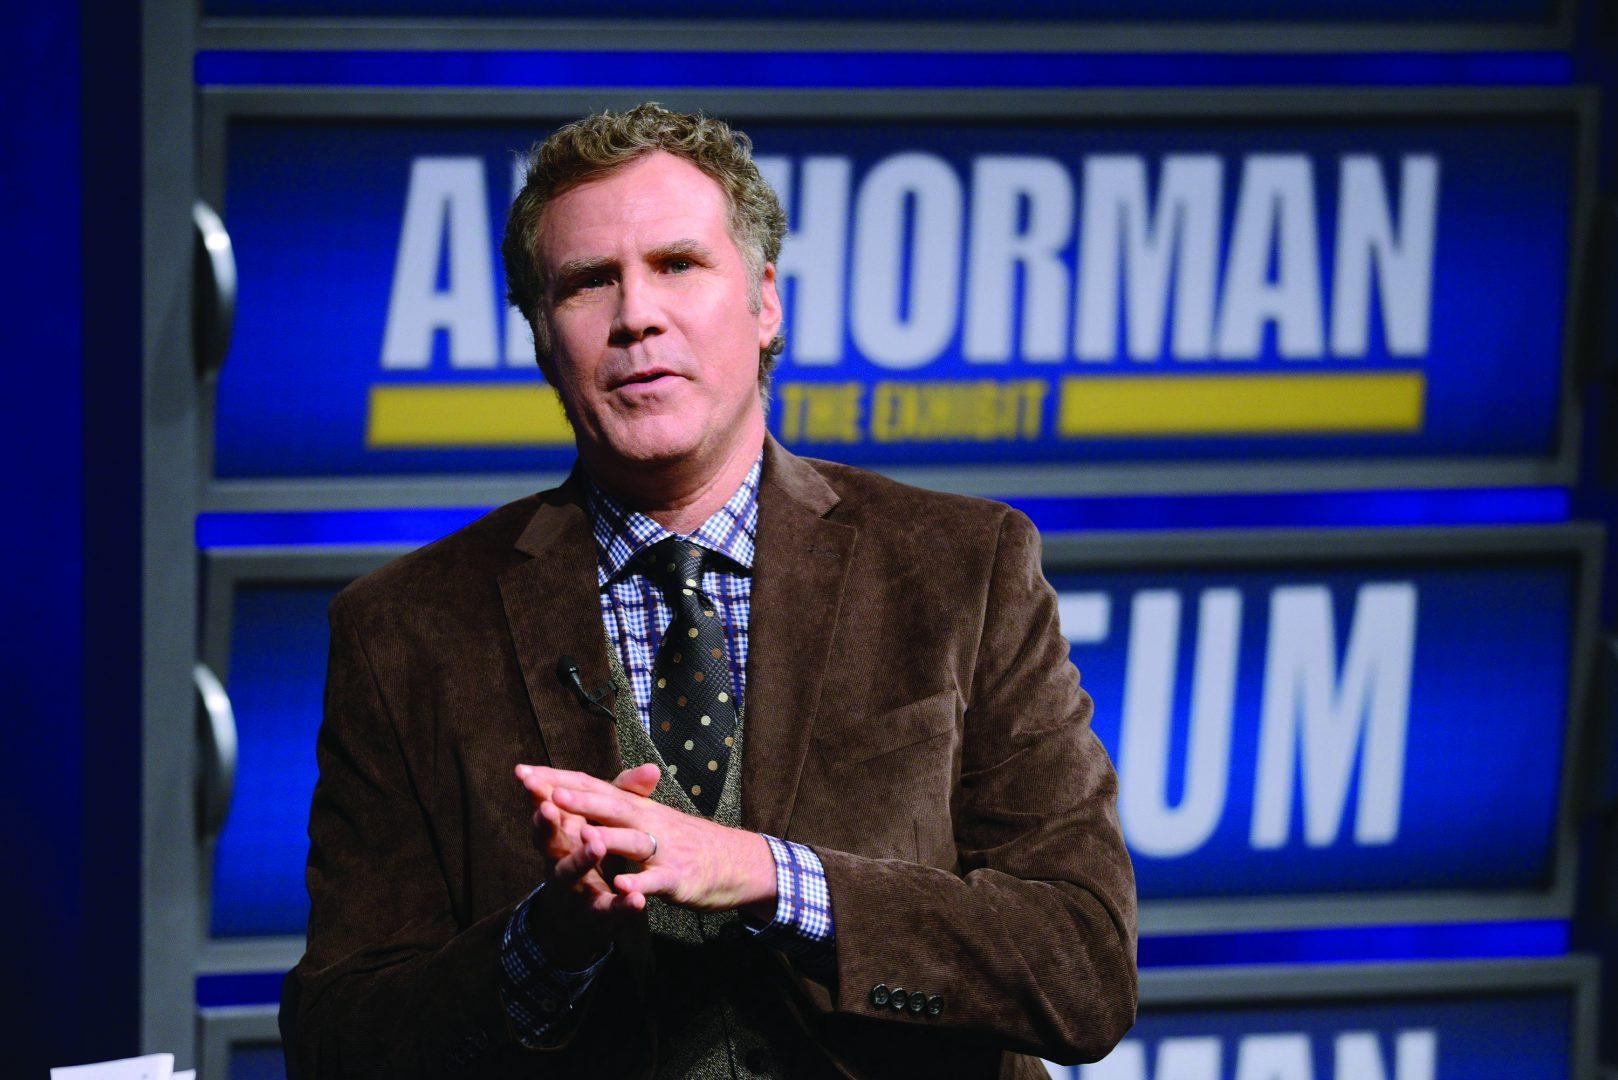 Actor Will Ferrell discusses his new movie, "Anchorman 2: The Legend Continues," at the Newseum in Washington on Tuesday, Dec. 3, 2013. (Olivier Douliery/Abaca Press/TNS)